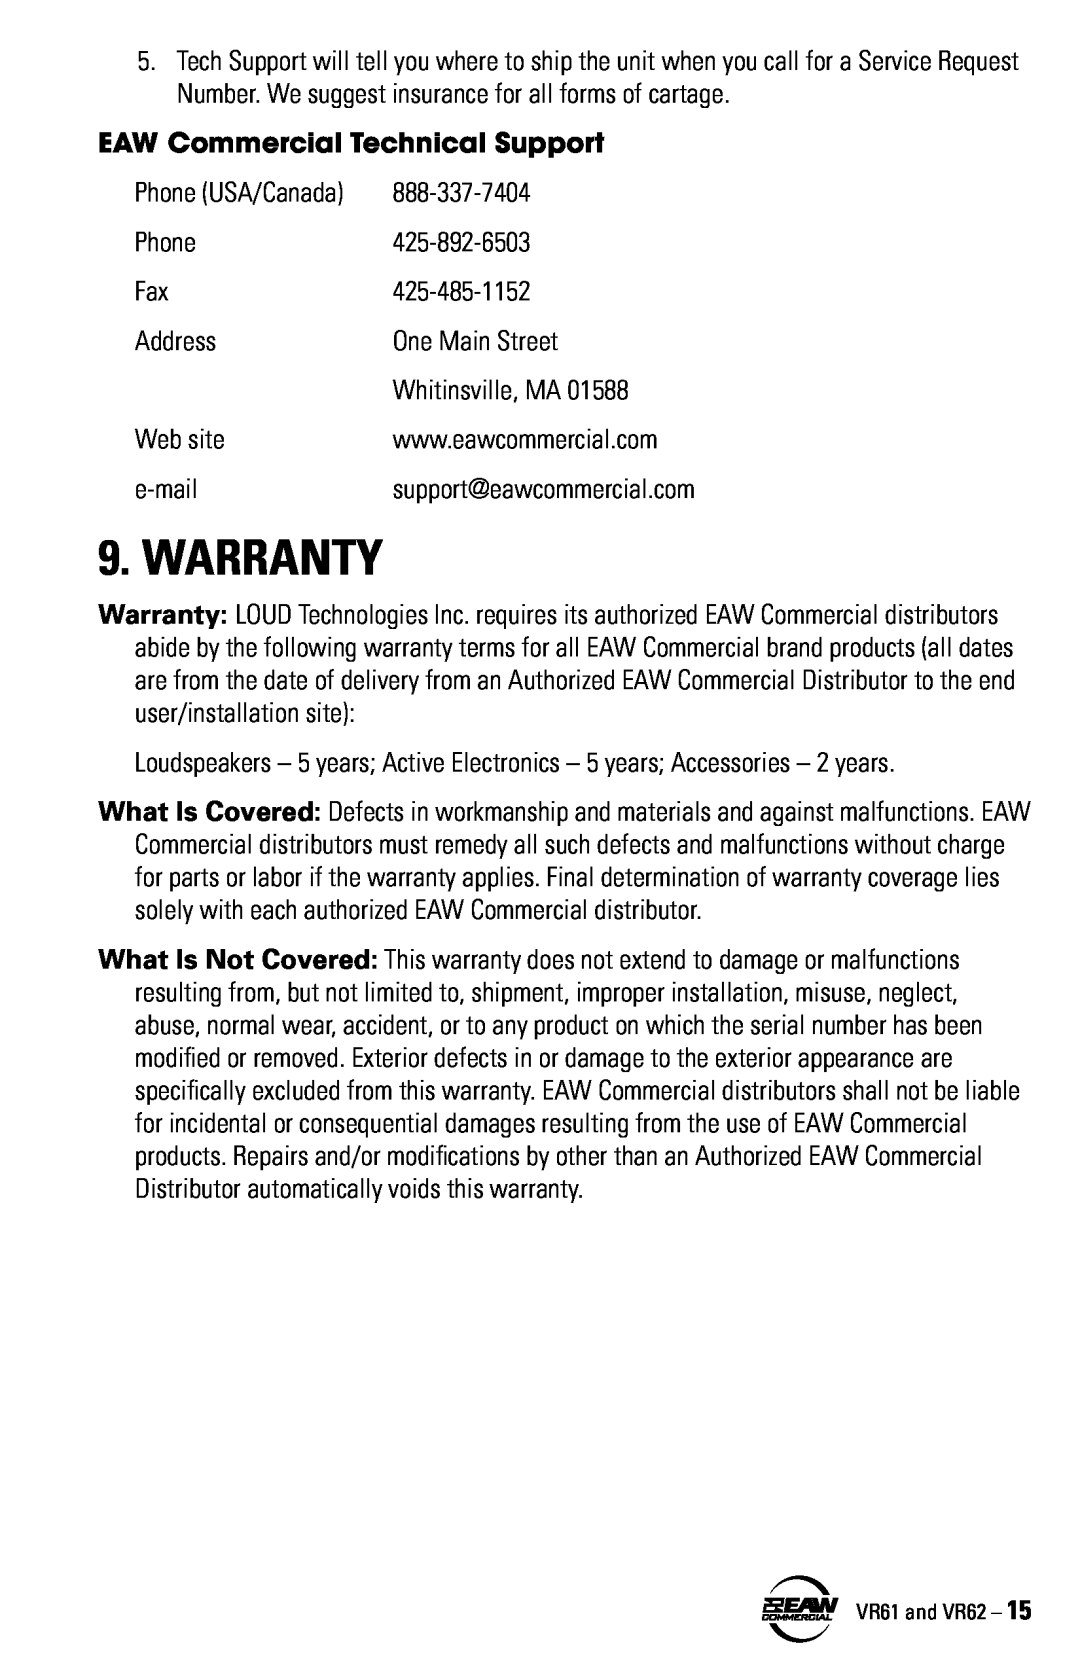 Kenwood VR62, VR61 instruction manual Warranty, EAW Commercial Technical Support 